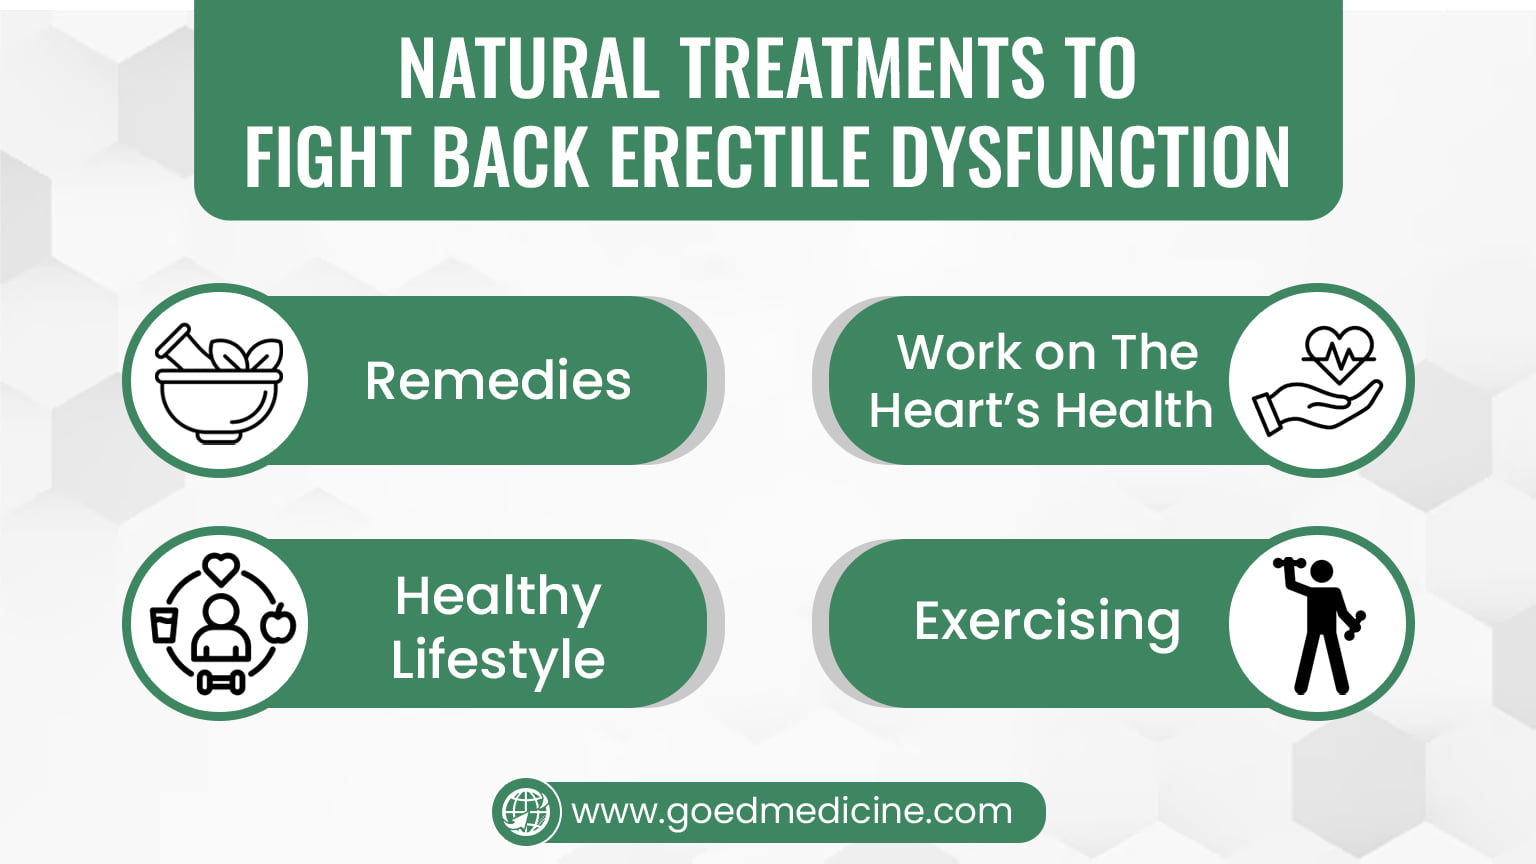 Natural Treatments to Fight Back Erectile Dysfunction